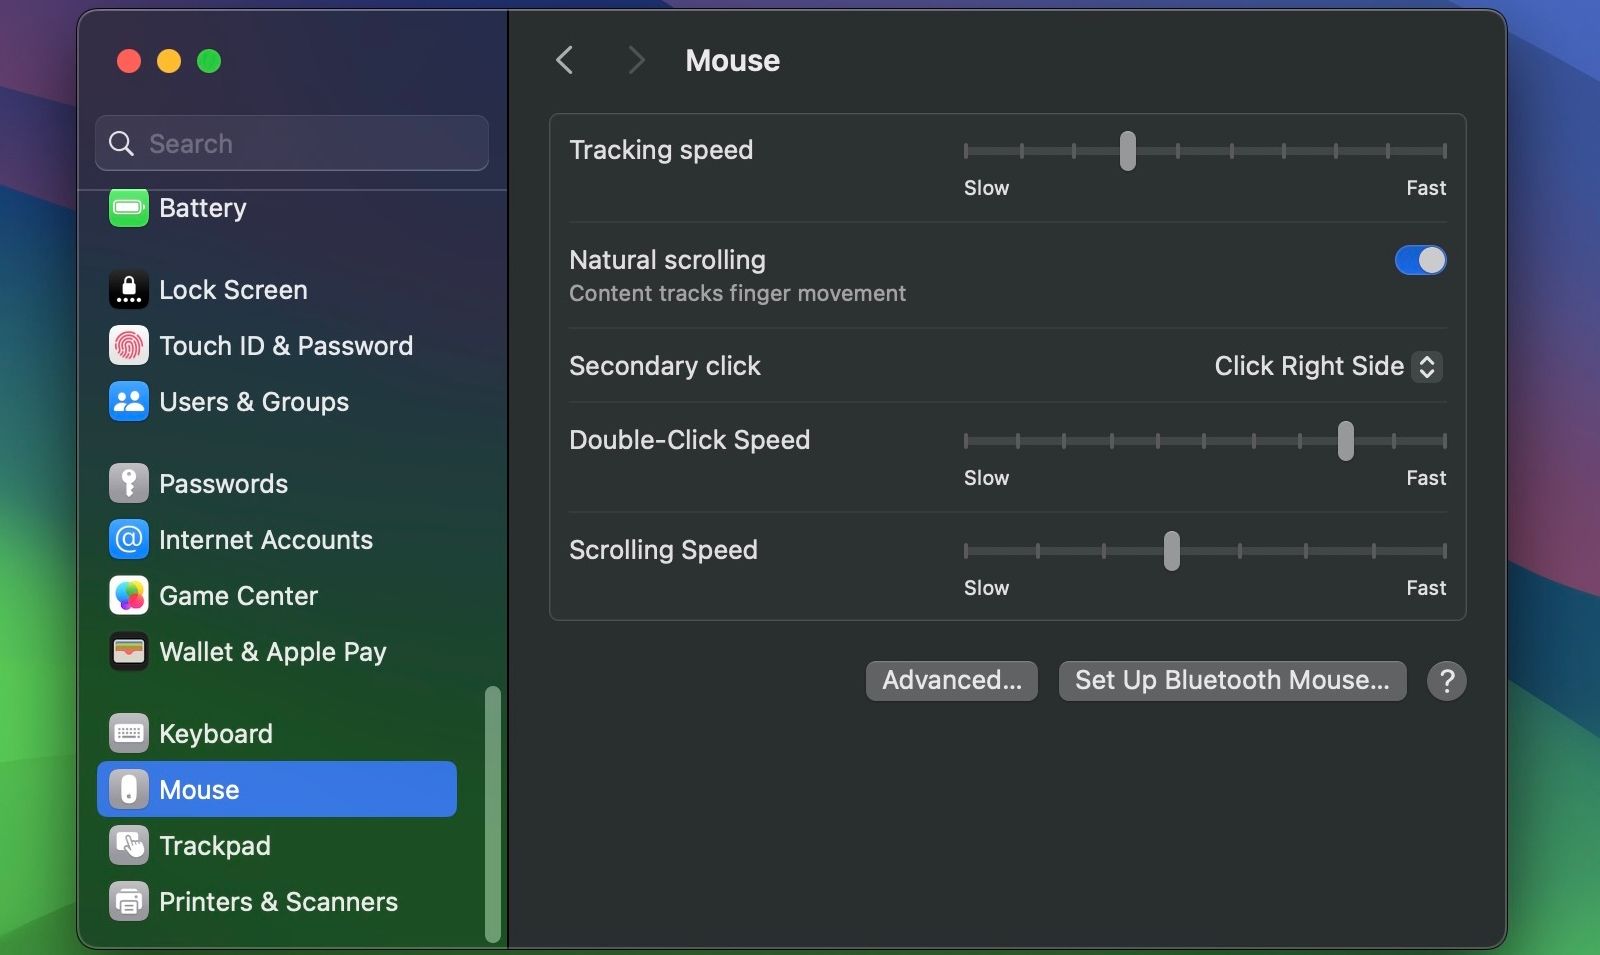 Right-click settings for a mouse in macOS